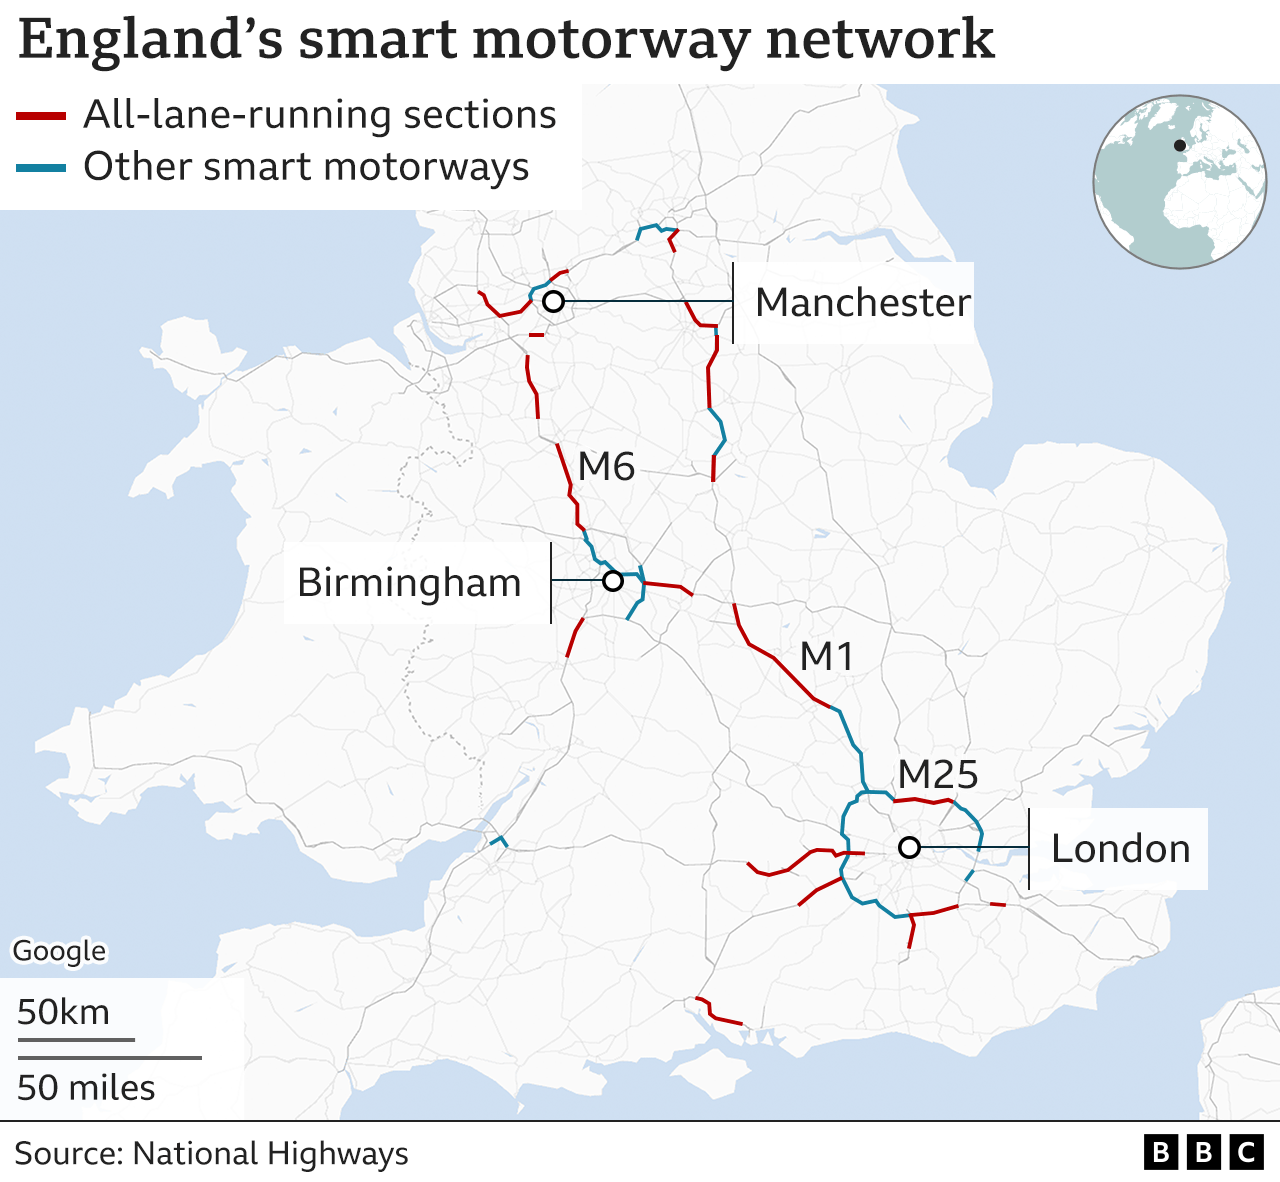 Map showing the location of smart motorway sections within the highway network in England.